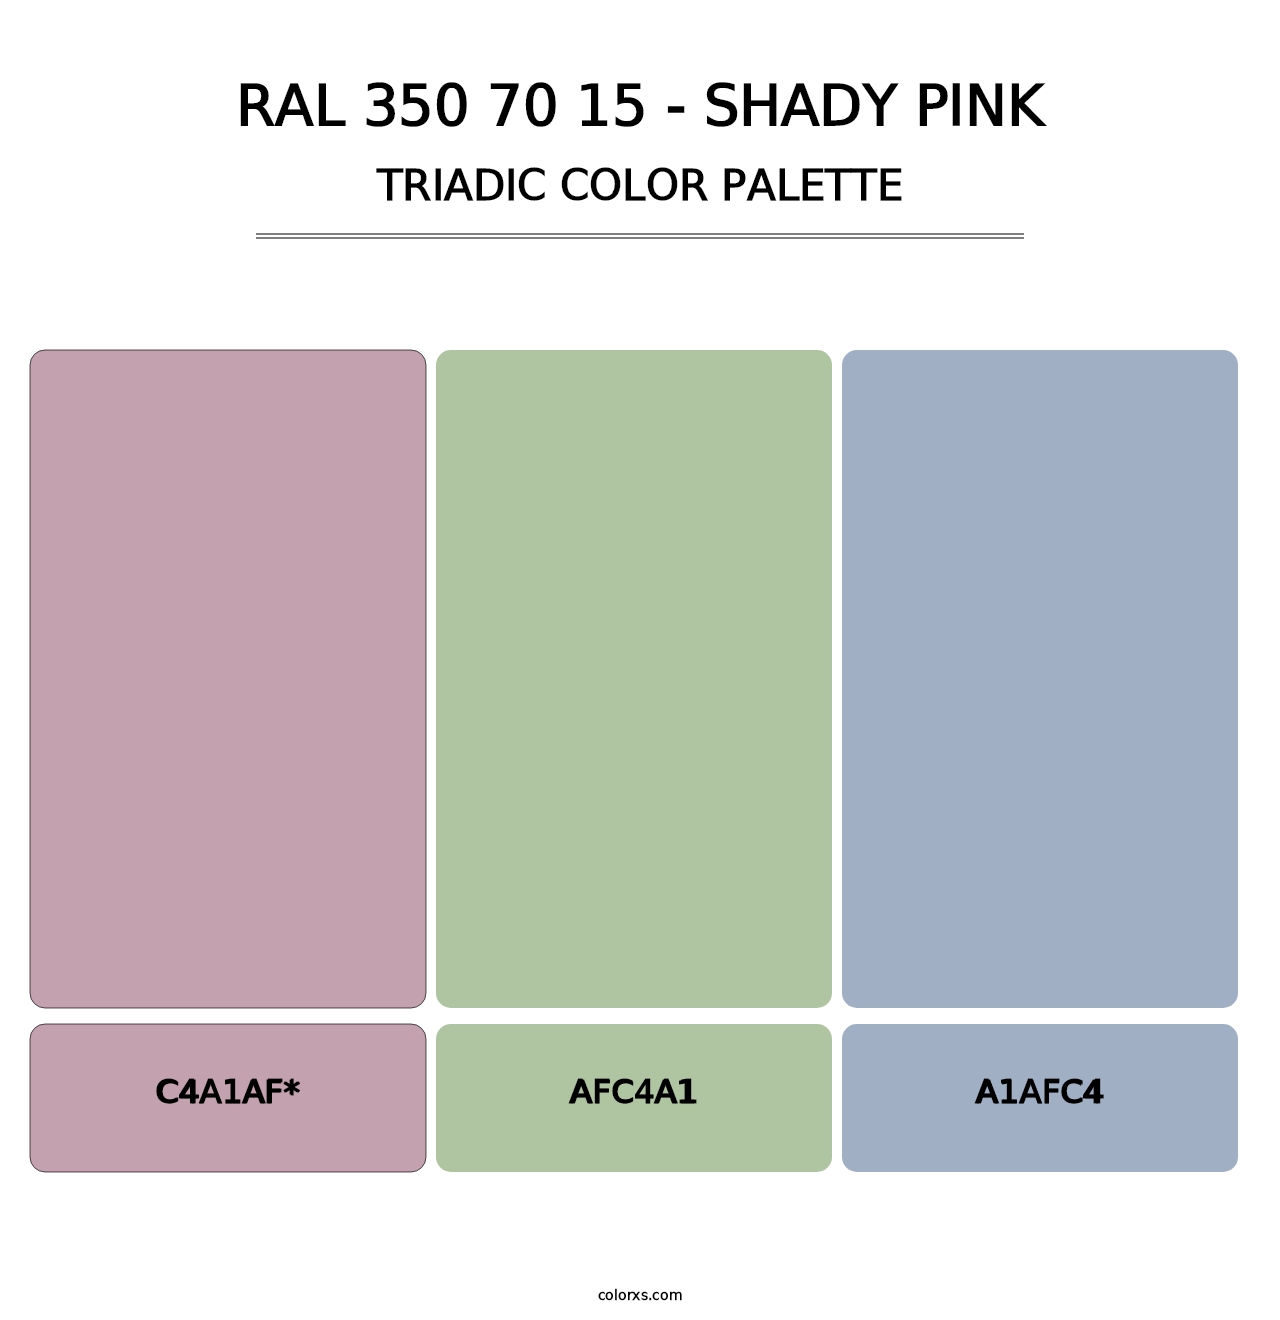 RAL 350 70 15 - Shady Pink - Triadic Color Palette